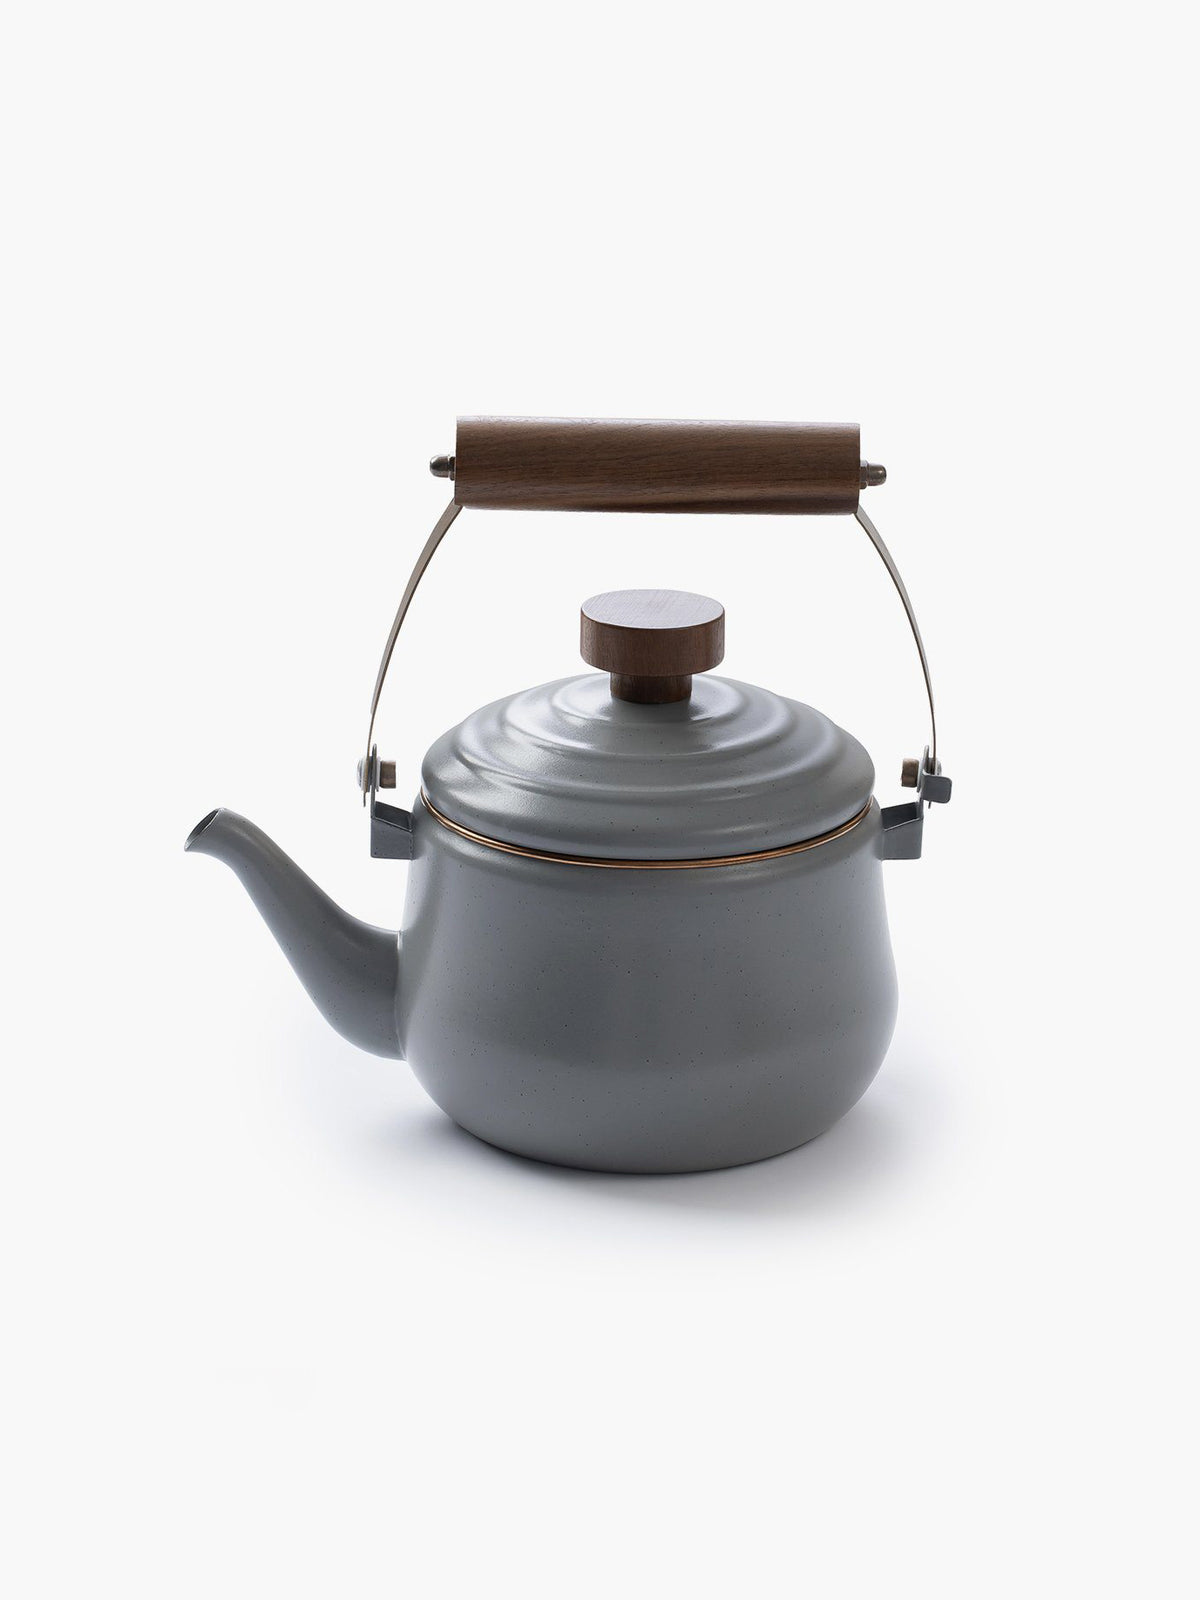 A Barebones Enamel Teapot - Slate Grey with a wooden handle on a white background.